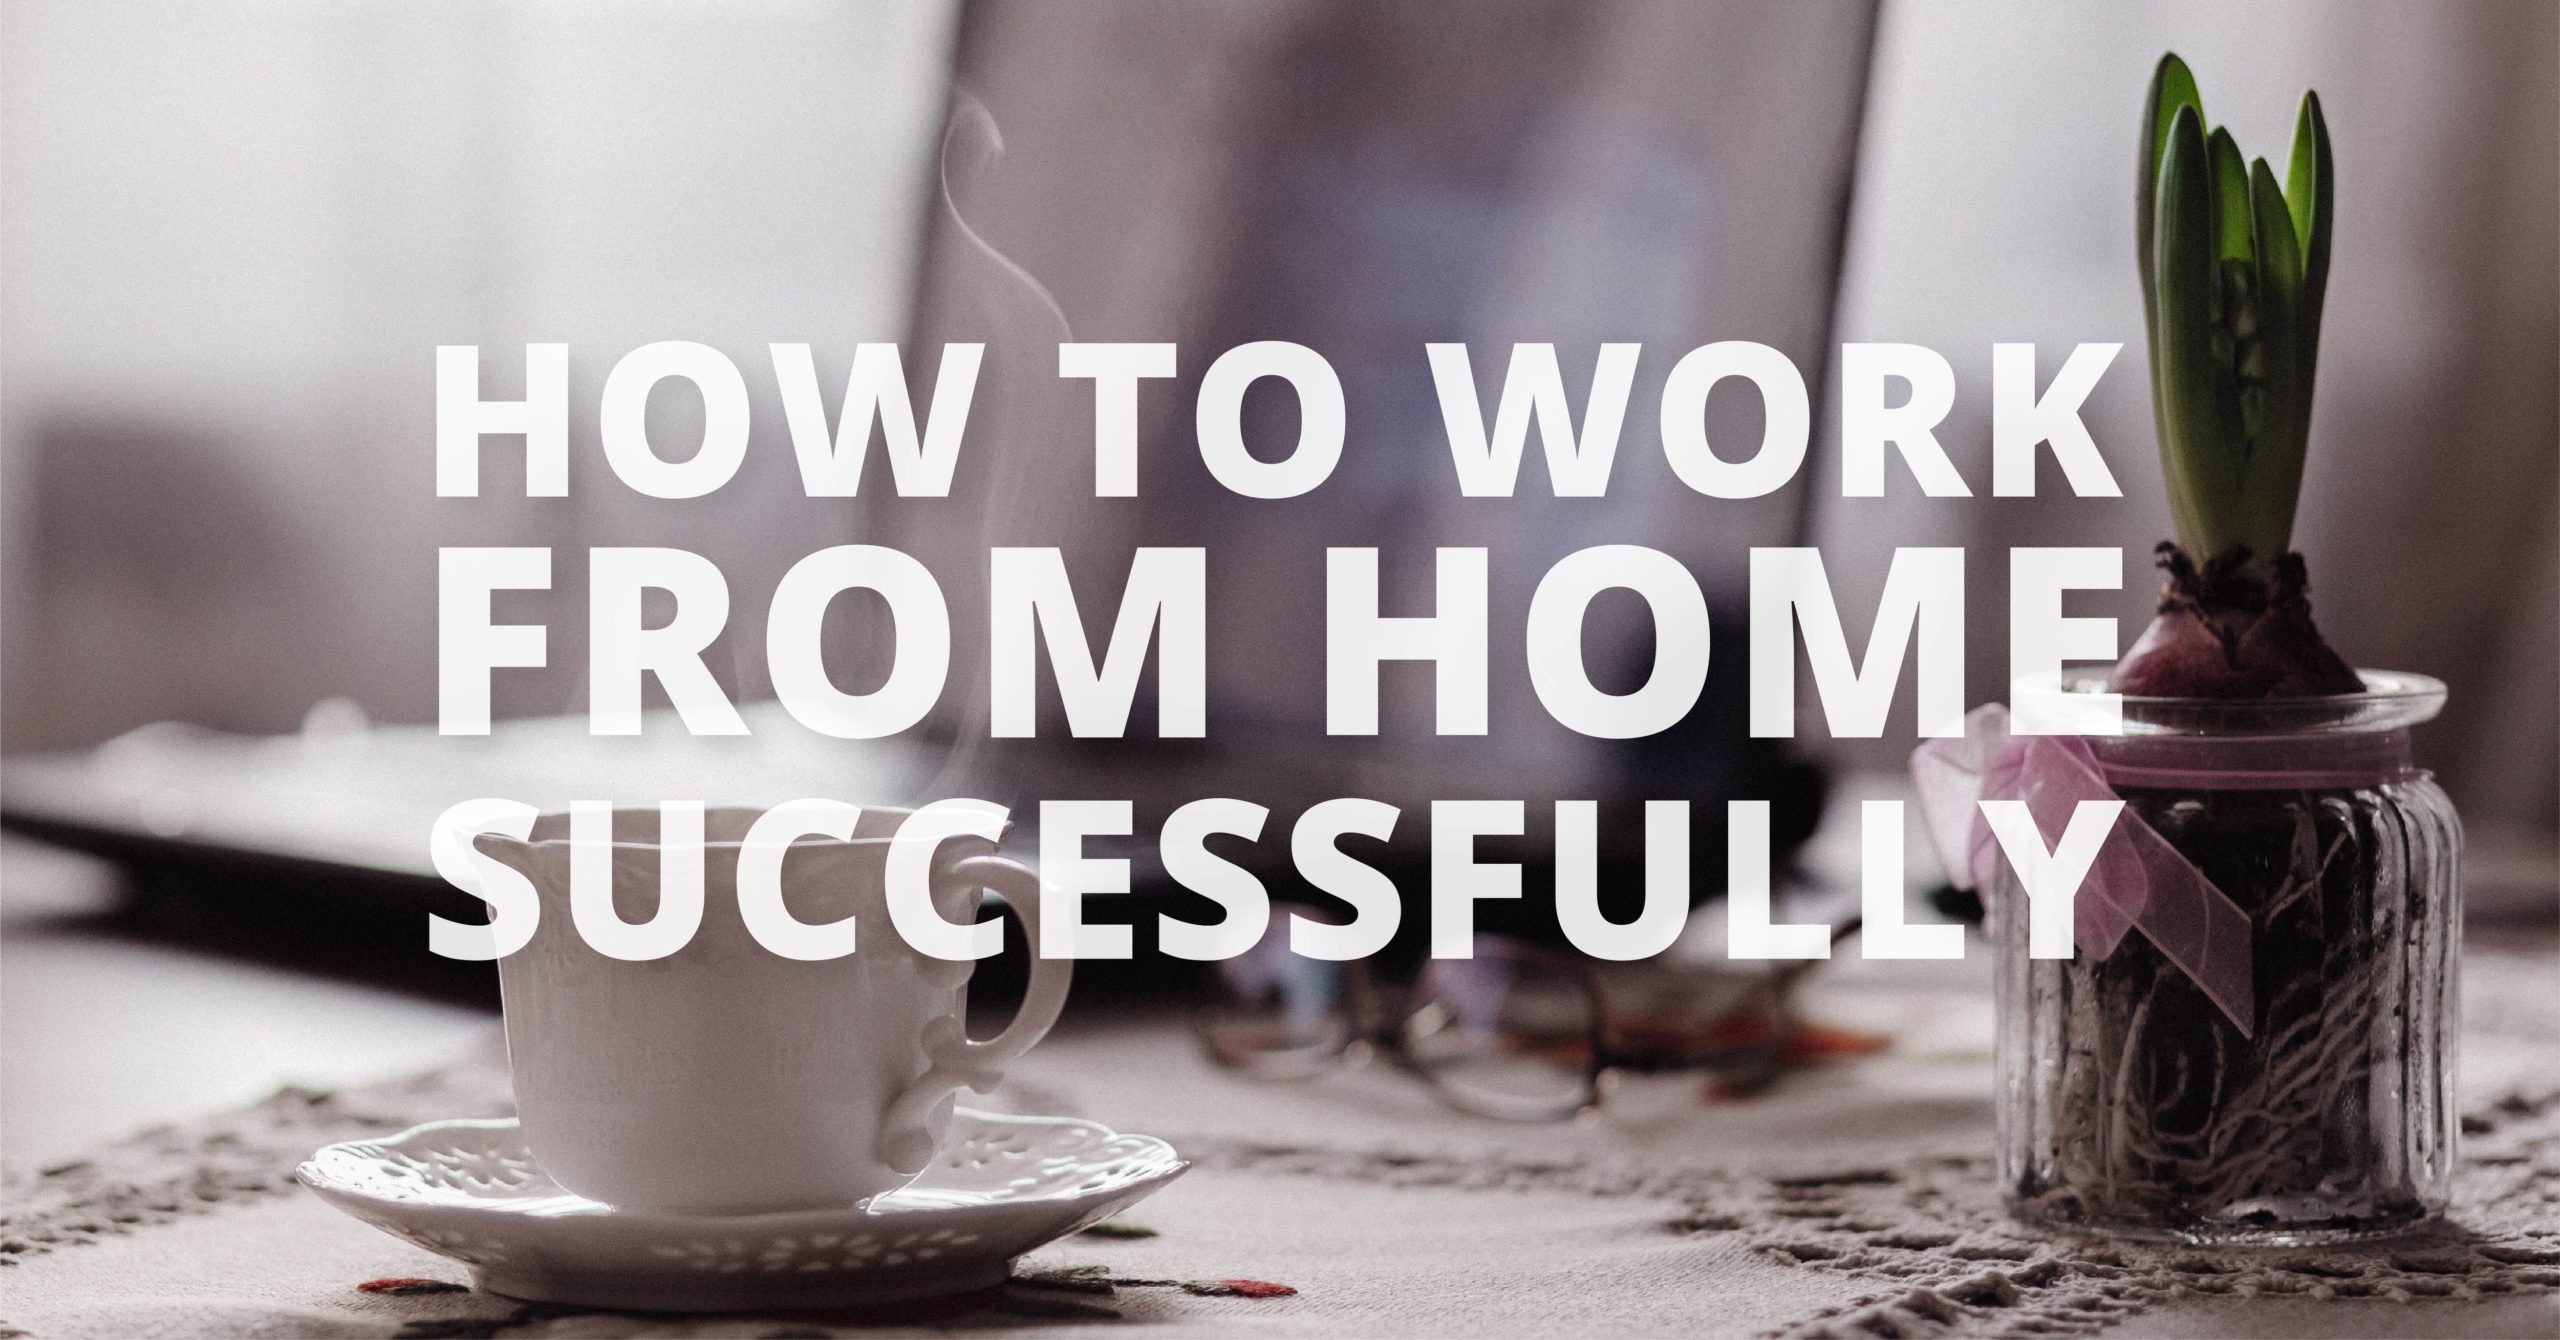 How to work from home successfully